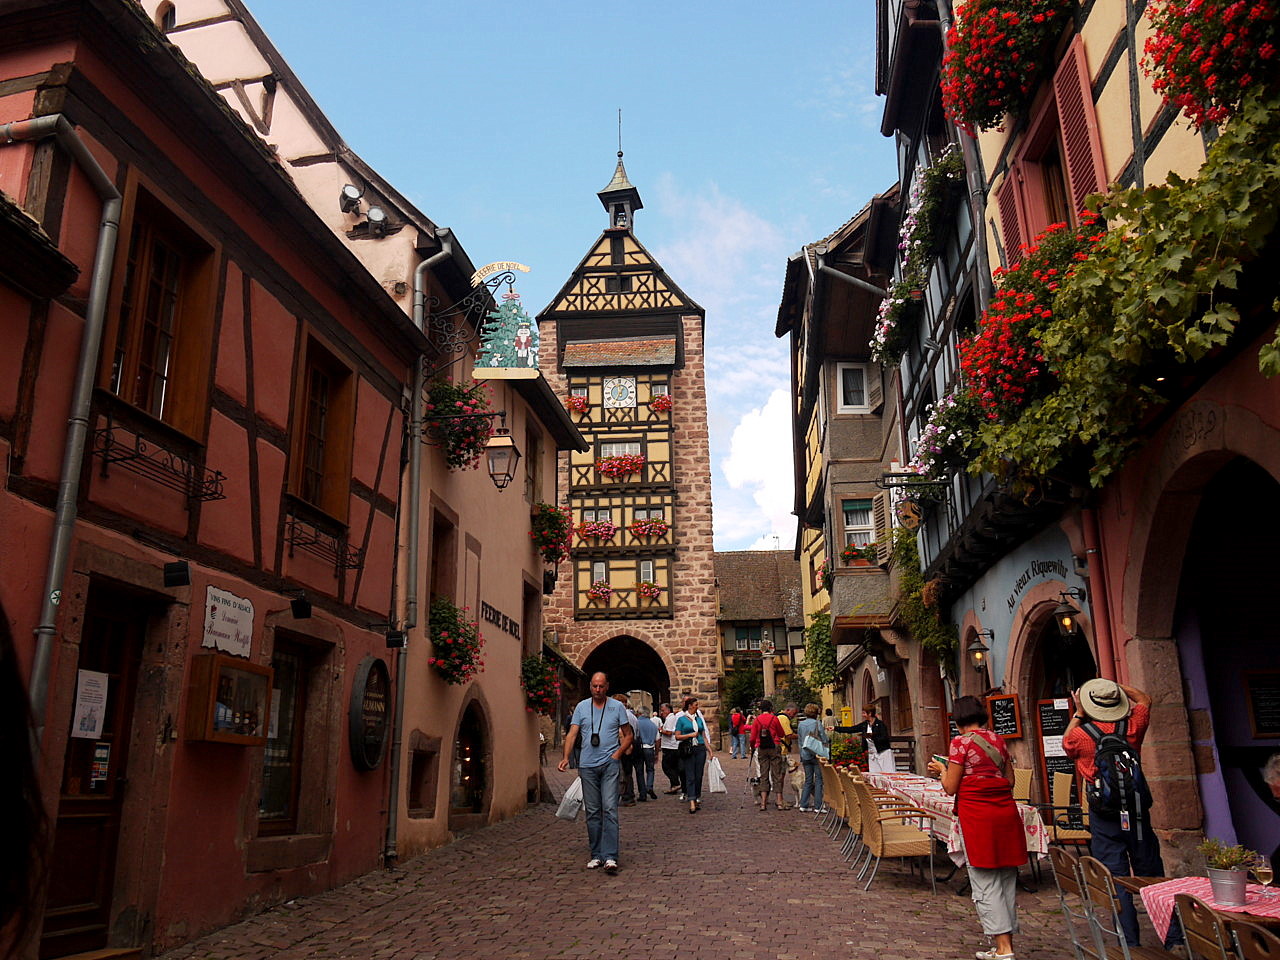 Riquewihr most beautiful villages of France2